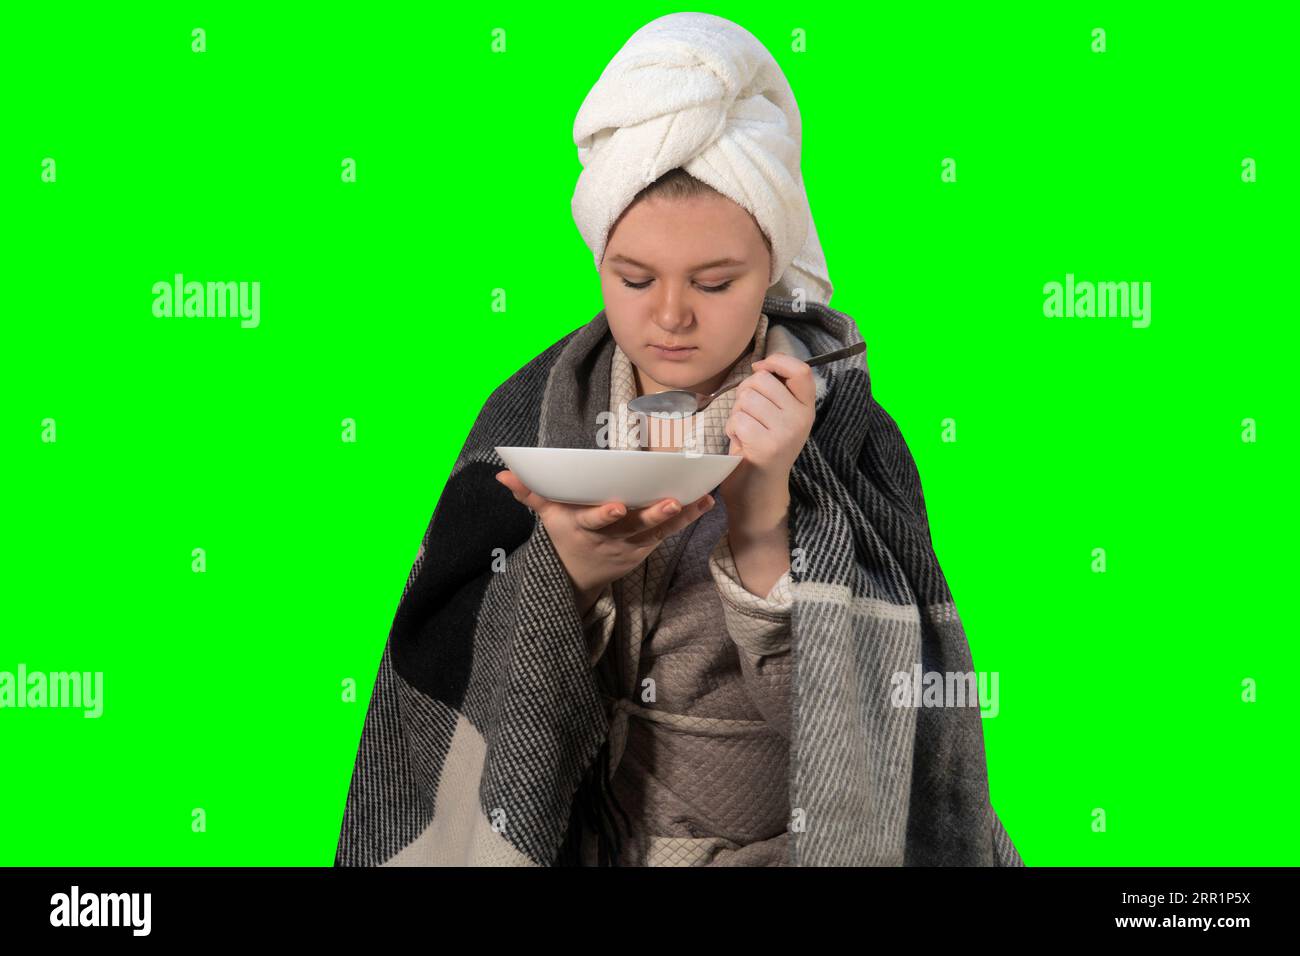 Girl with cold symptoms eats broth from a plate on a green background (chroma key). Concept of medicine, healthcare, pharmacy and home treatment Stock Photo